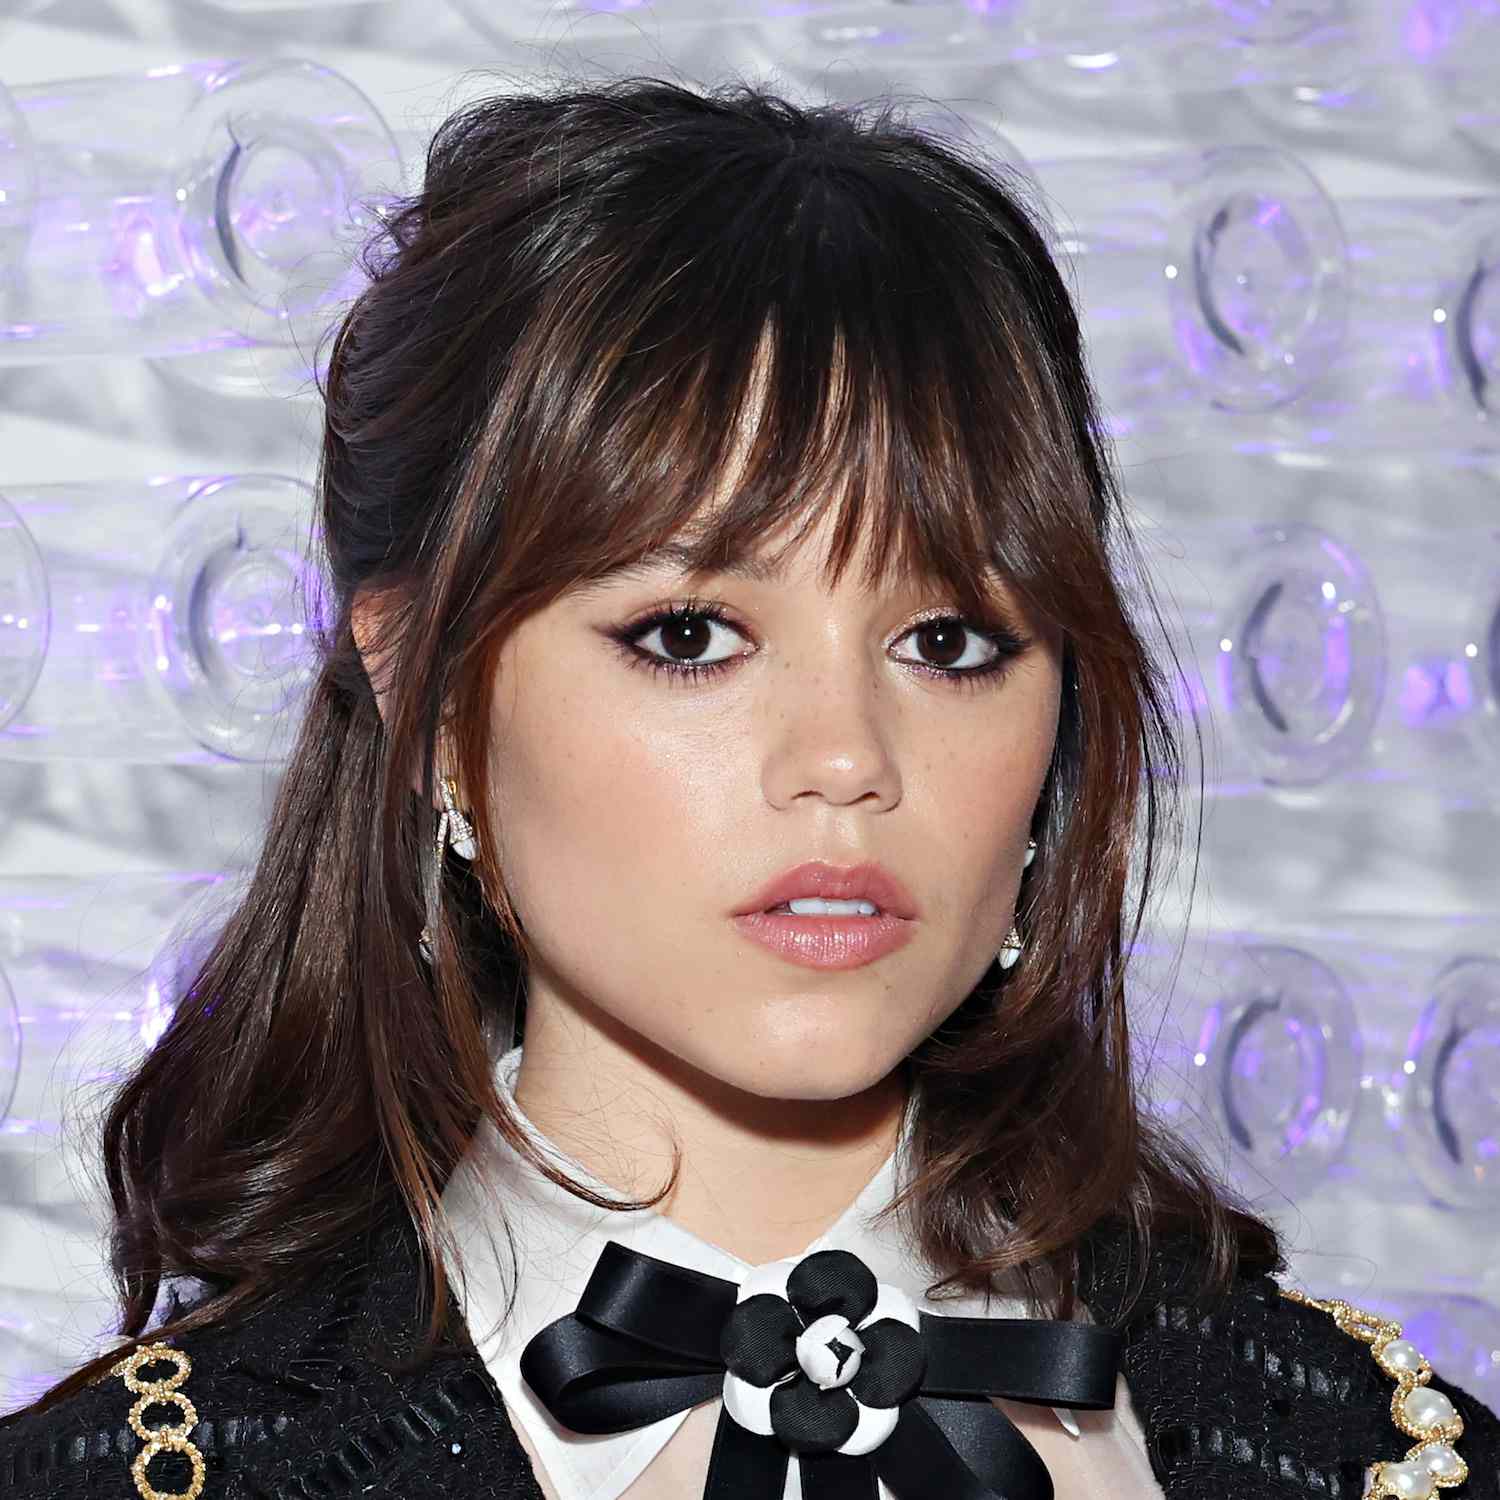 Jenna Ortega wears a shoulder-length half-up bob hairstyle with bangs and face-framing layers